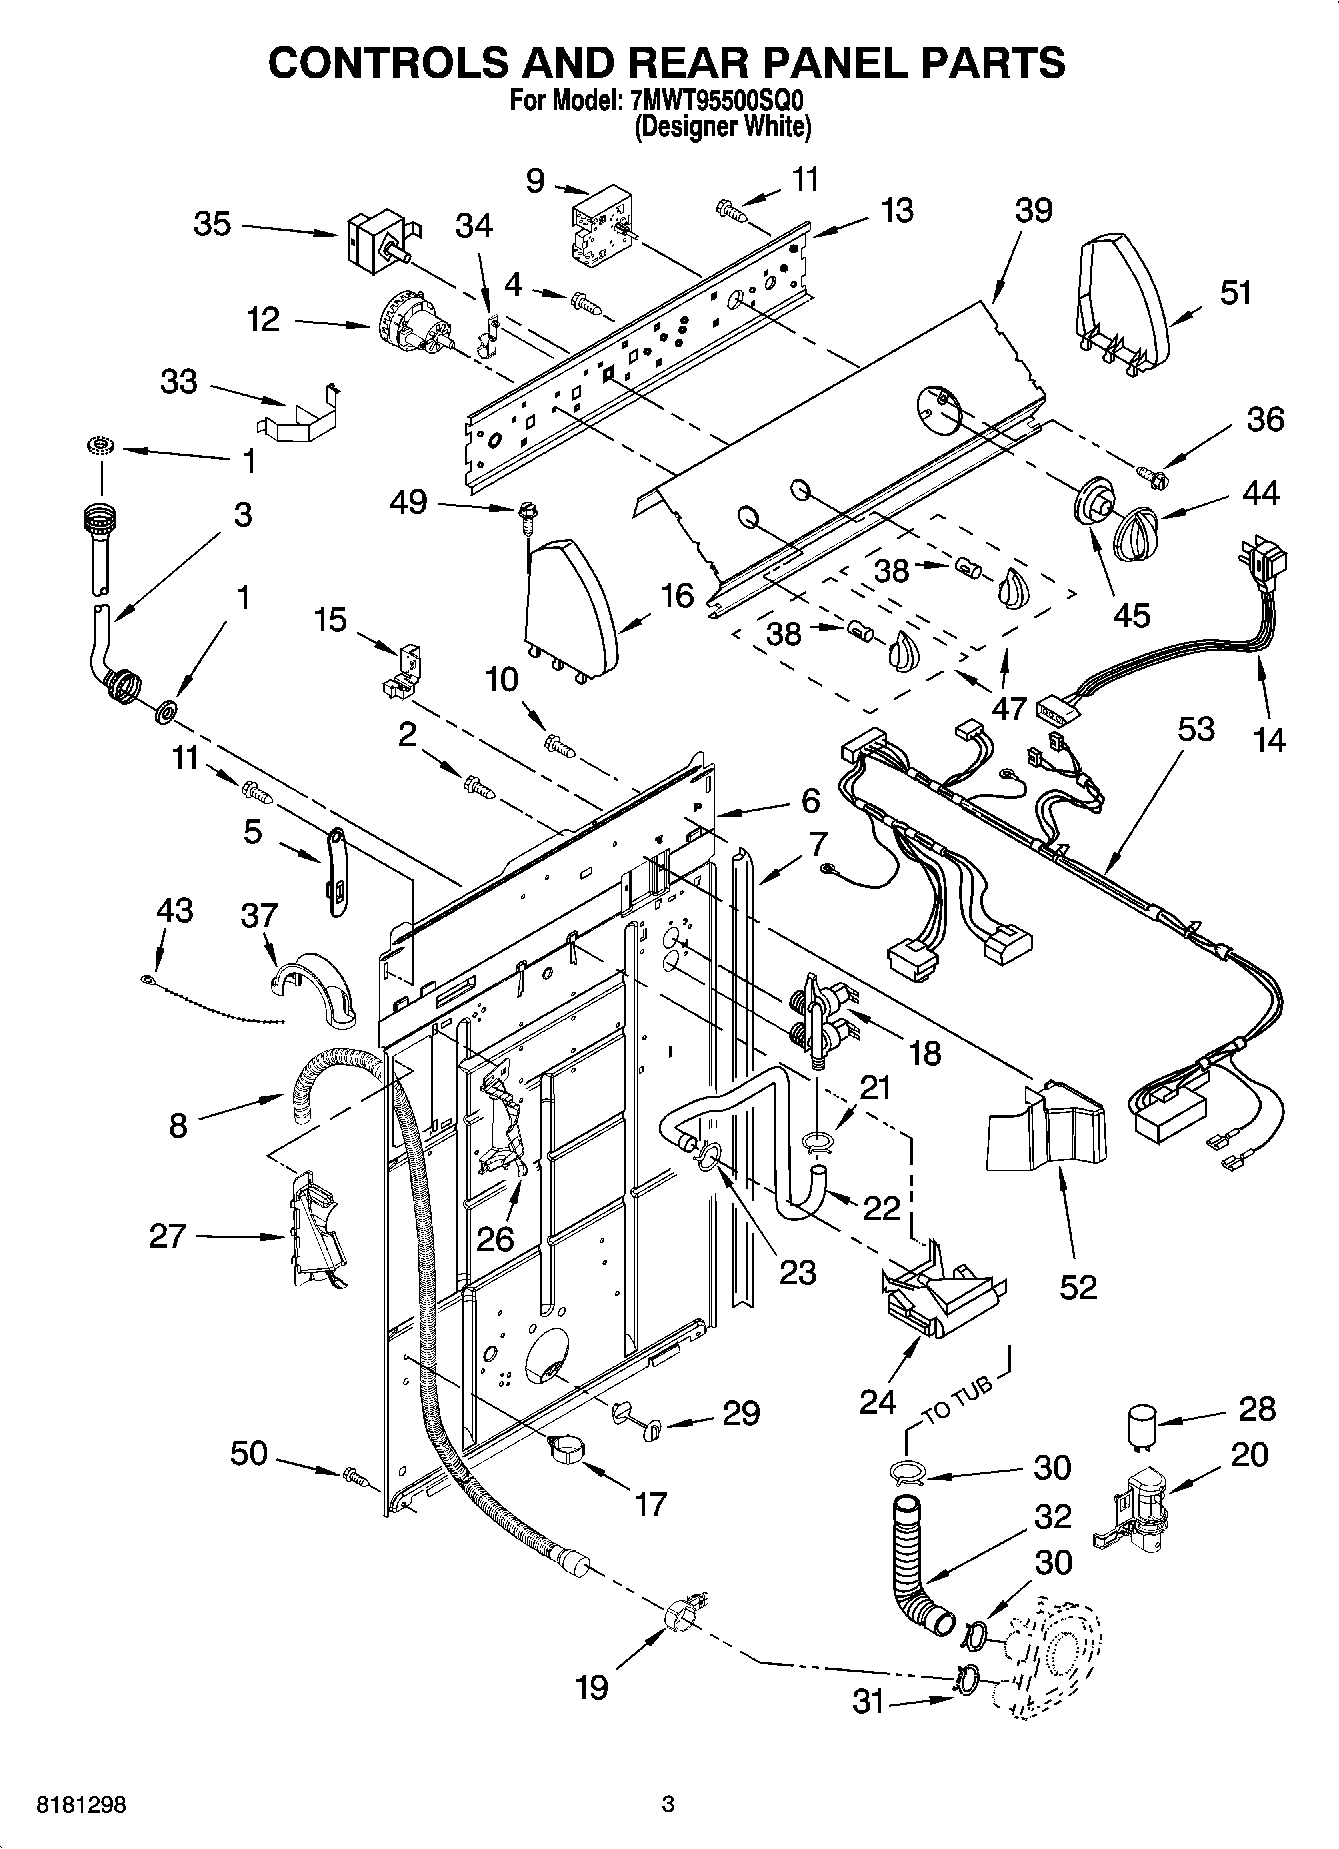 02 - CONTROLS AND REAR PANEL PARTS